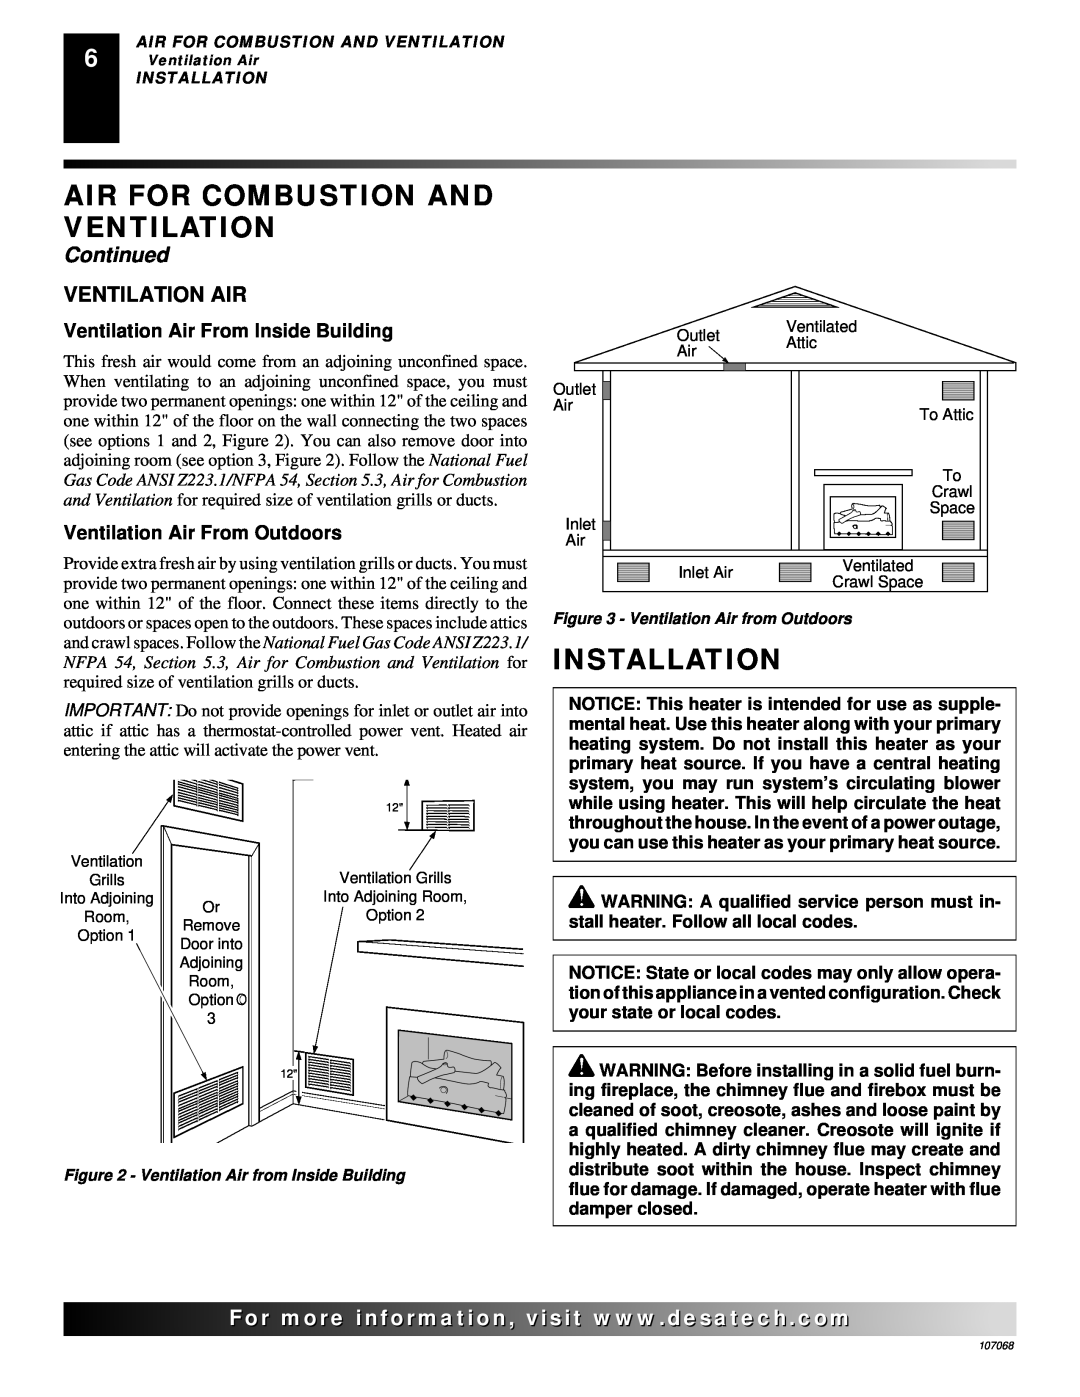 Desa CLD3018PA, CGS3124N Installation, Air For Combustion And Ventilation, Continued, Ventilation Air from Outdoors 